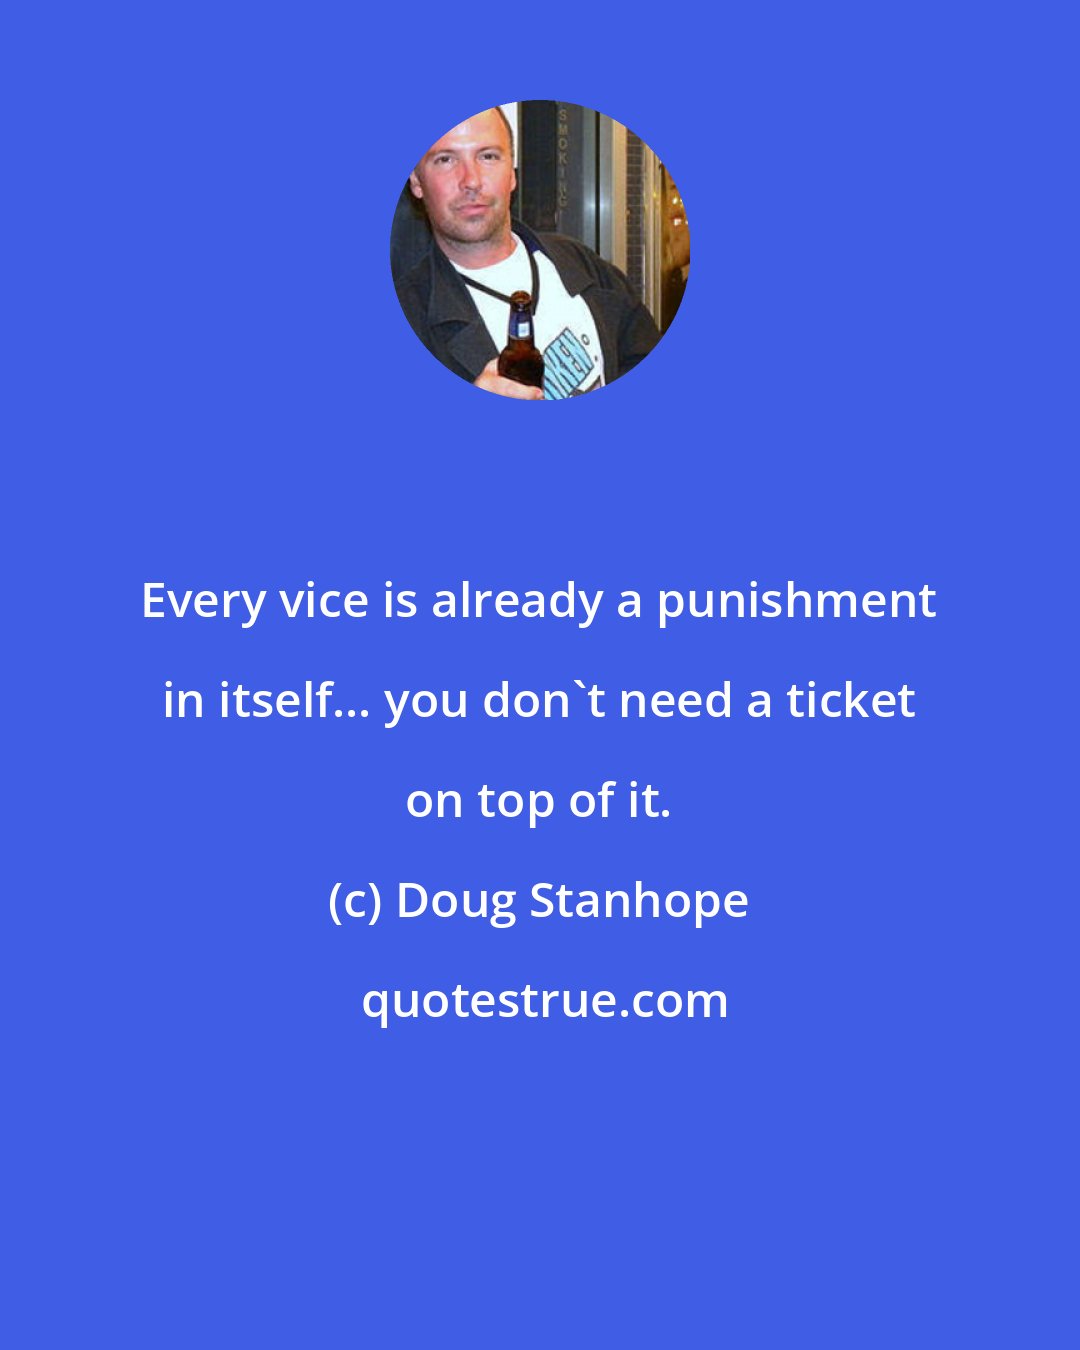 Doug Stanhope: Every vice is already a punishment in itself... you don't need a ticket on top of it.